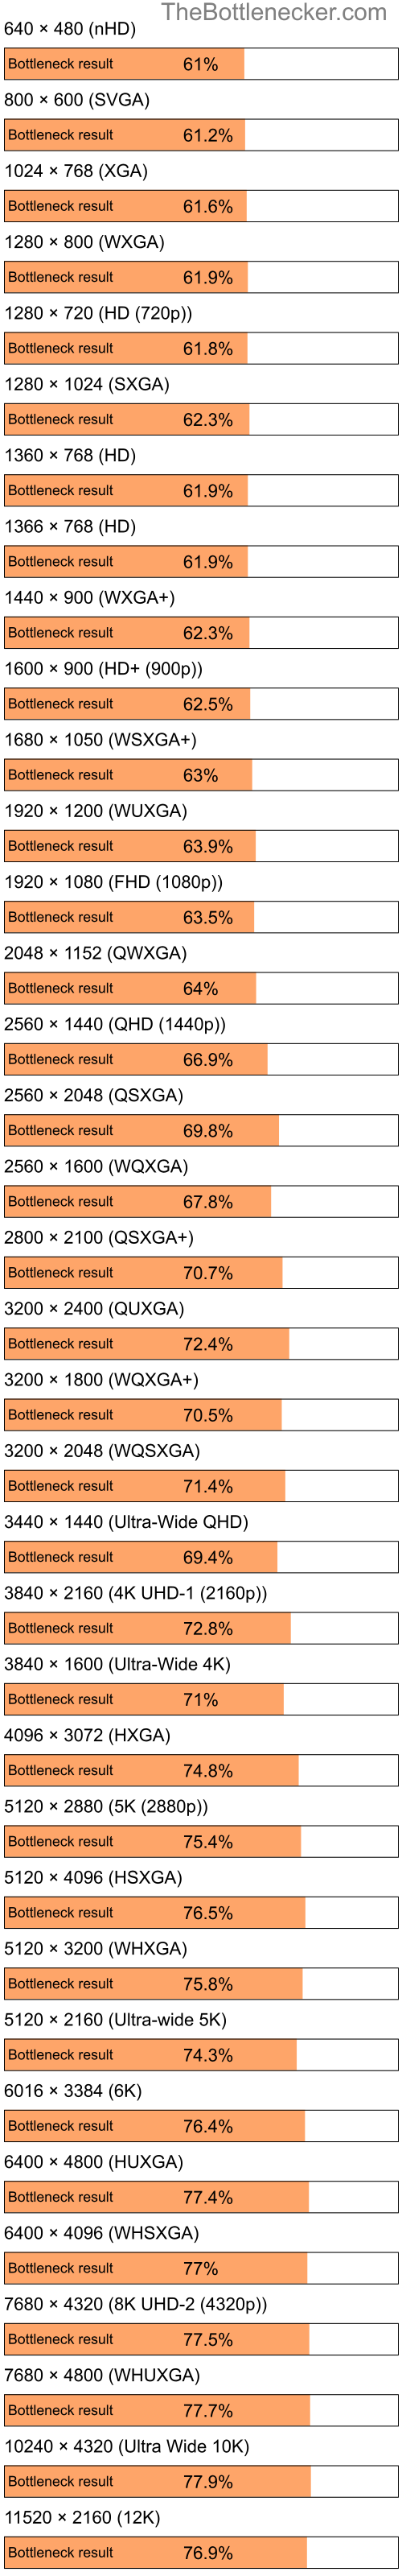 Bottleneck results by resolution for Intel Celeron and NVIDIA Quadro FX 370M in General Tasks